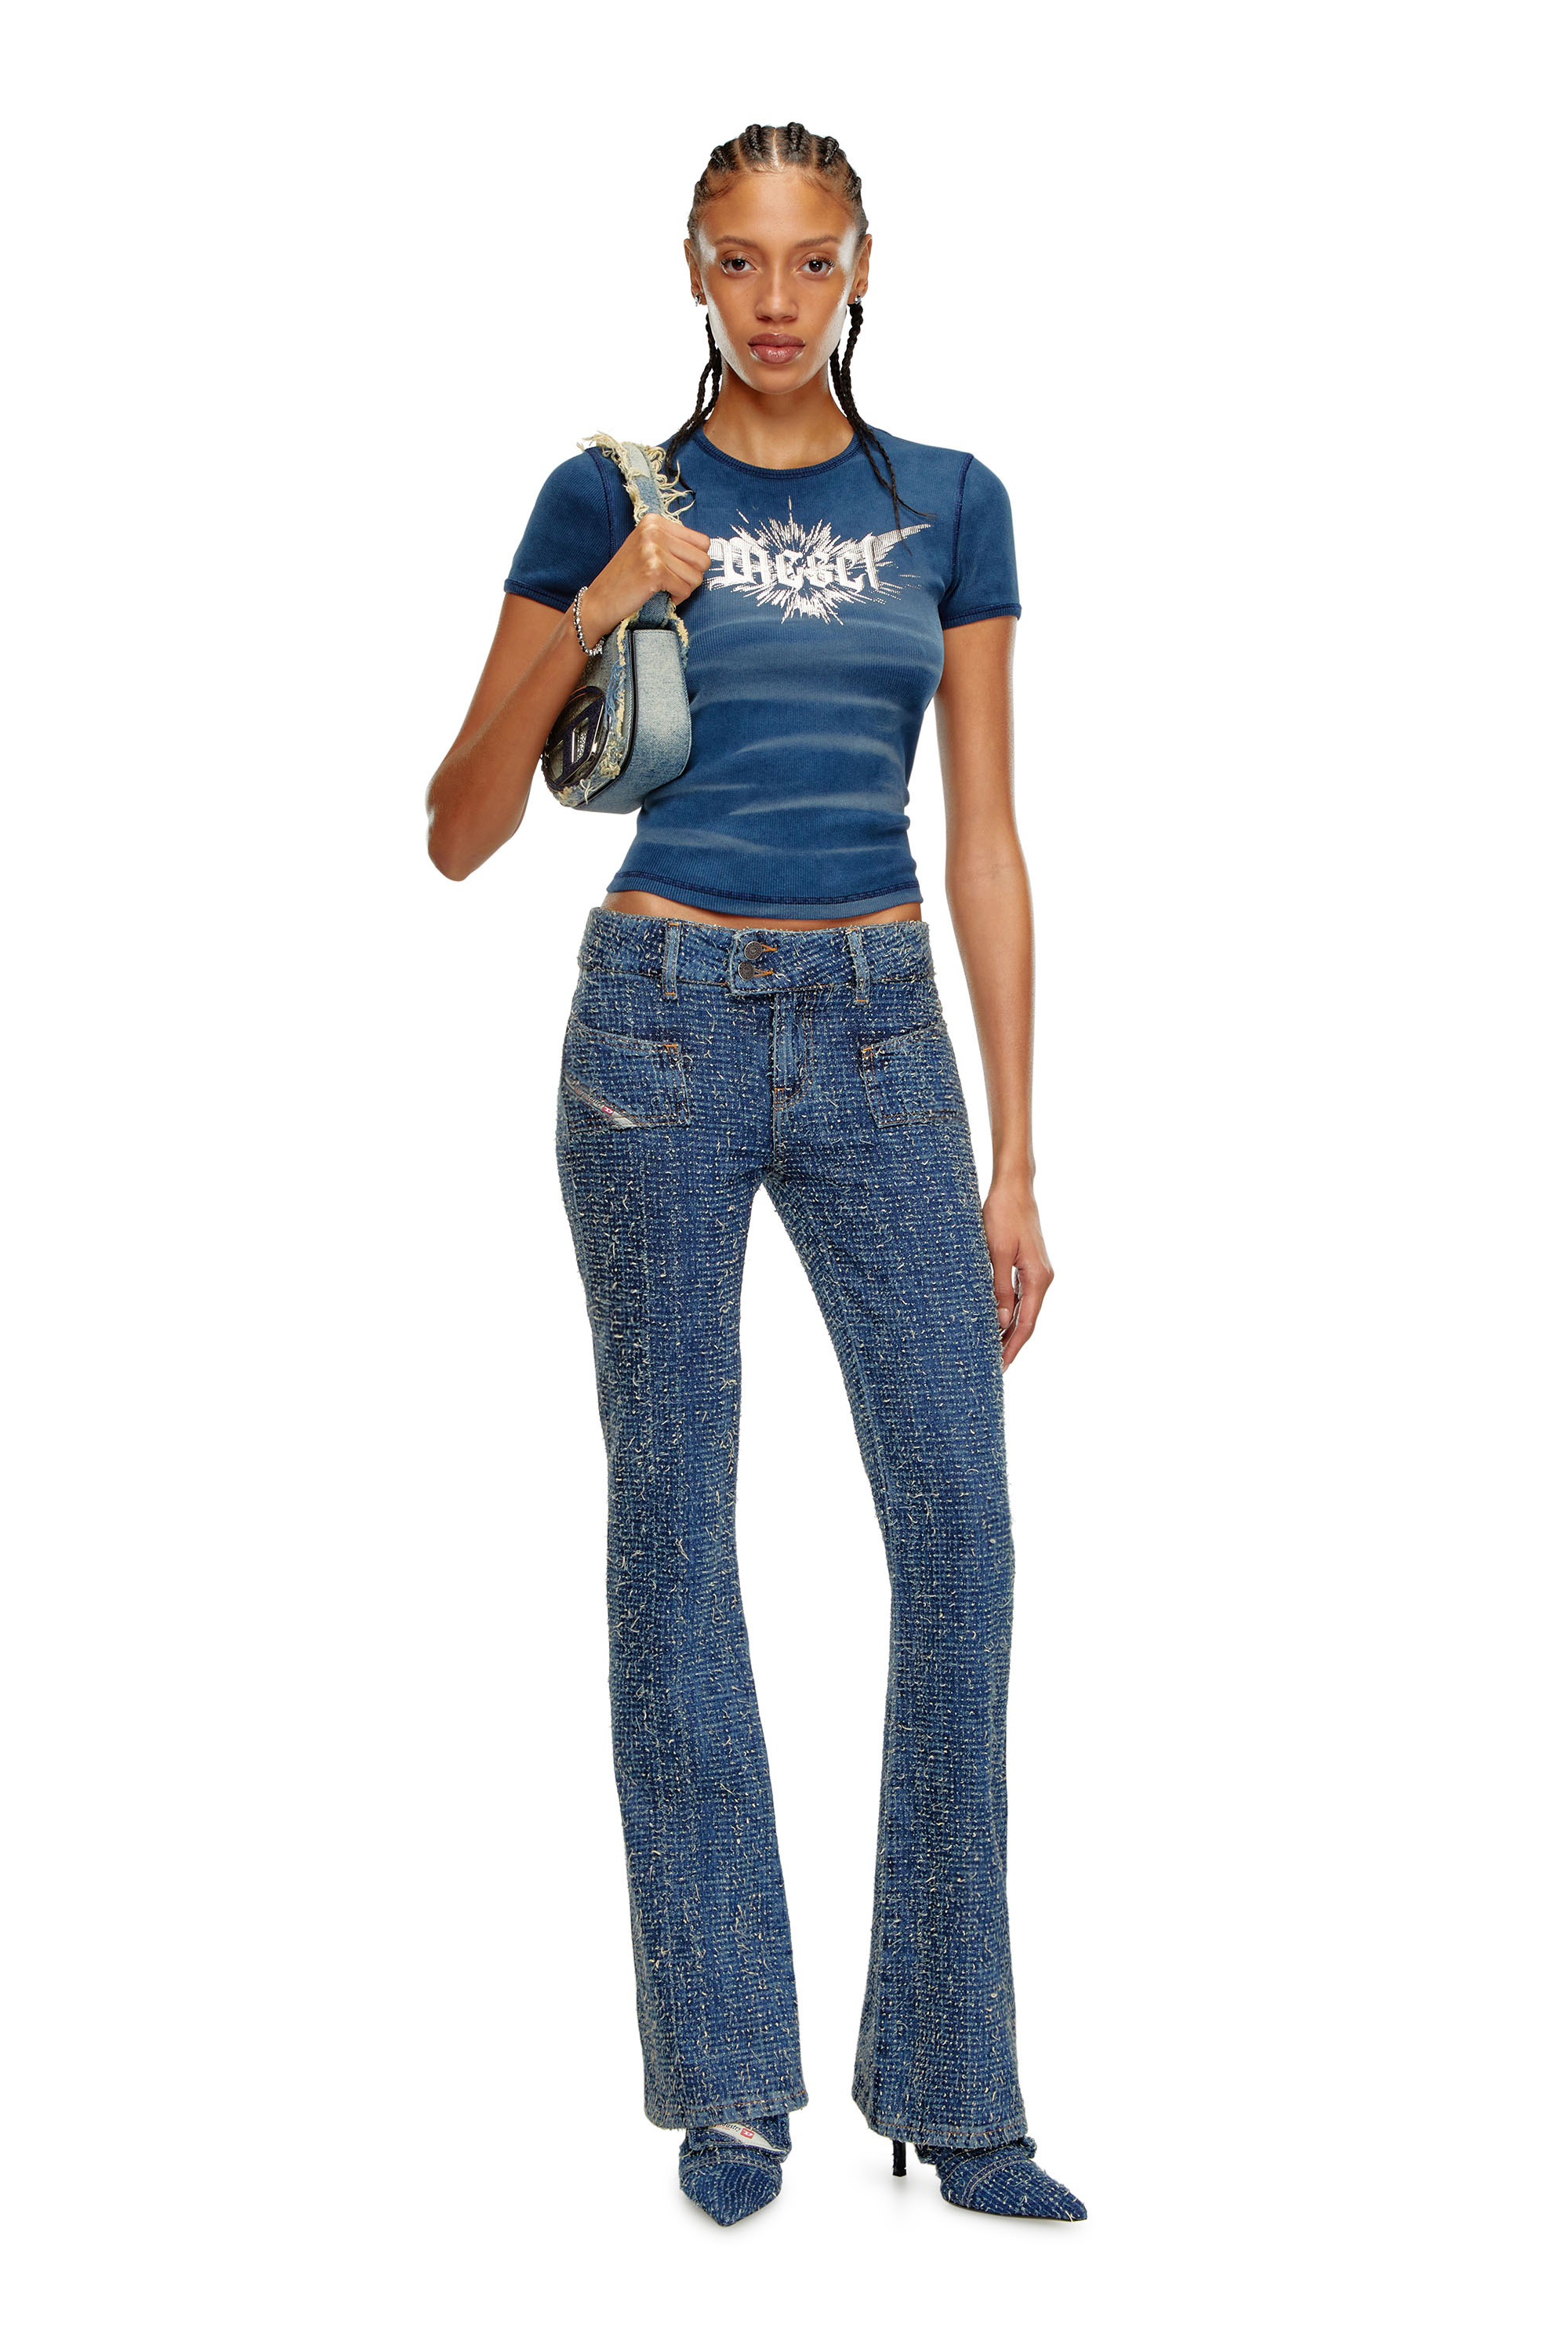 Diesel - Bootcut and Flare Jeans D-Ebush 0PGAH, Mujer Bootcut y Flare Jeans - D-Ebush in Azul marino - Image 2